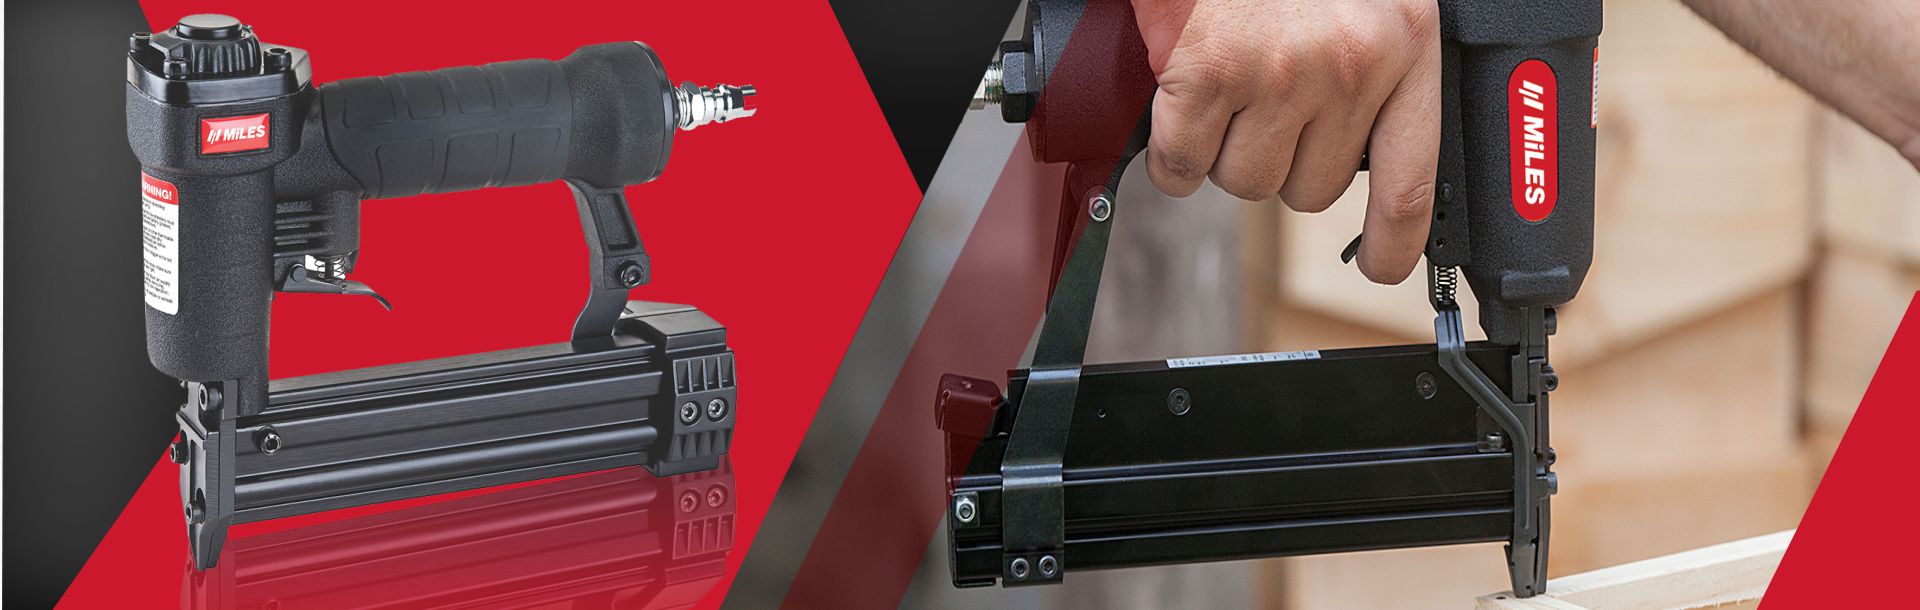 Our compact and lightweight pneumatic tools cater to both professional and DIY needs. Its ergonomic engineering offers extra working comfort, thus helping you to be extra productive.